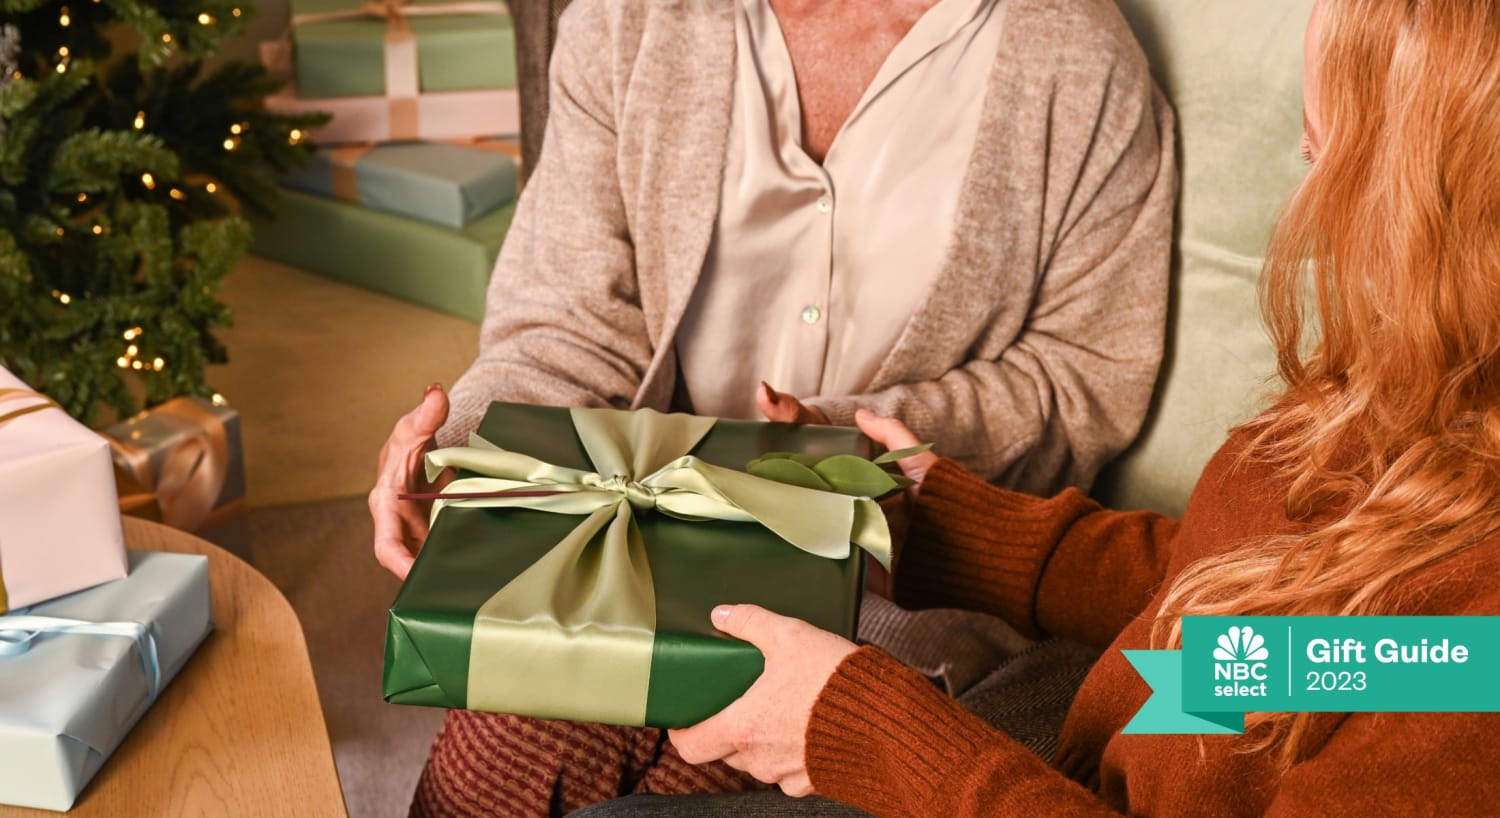 How Are Online Gifts Changing Modern-Day Gift Giving?